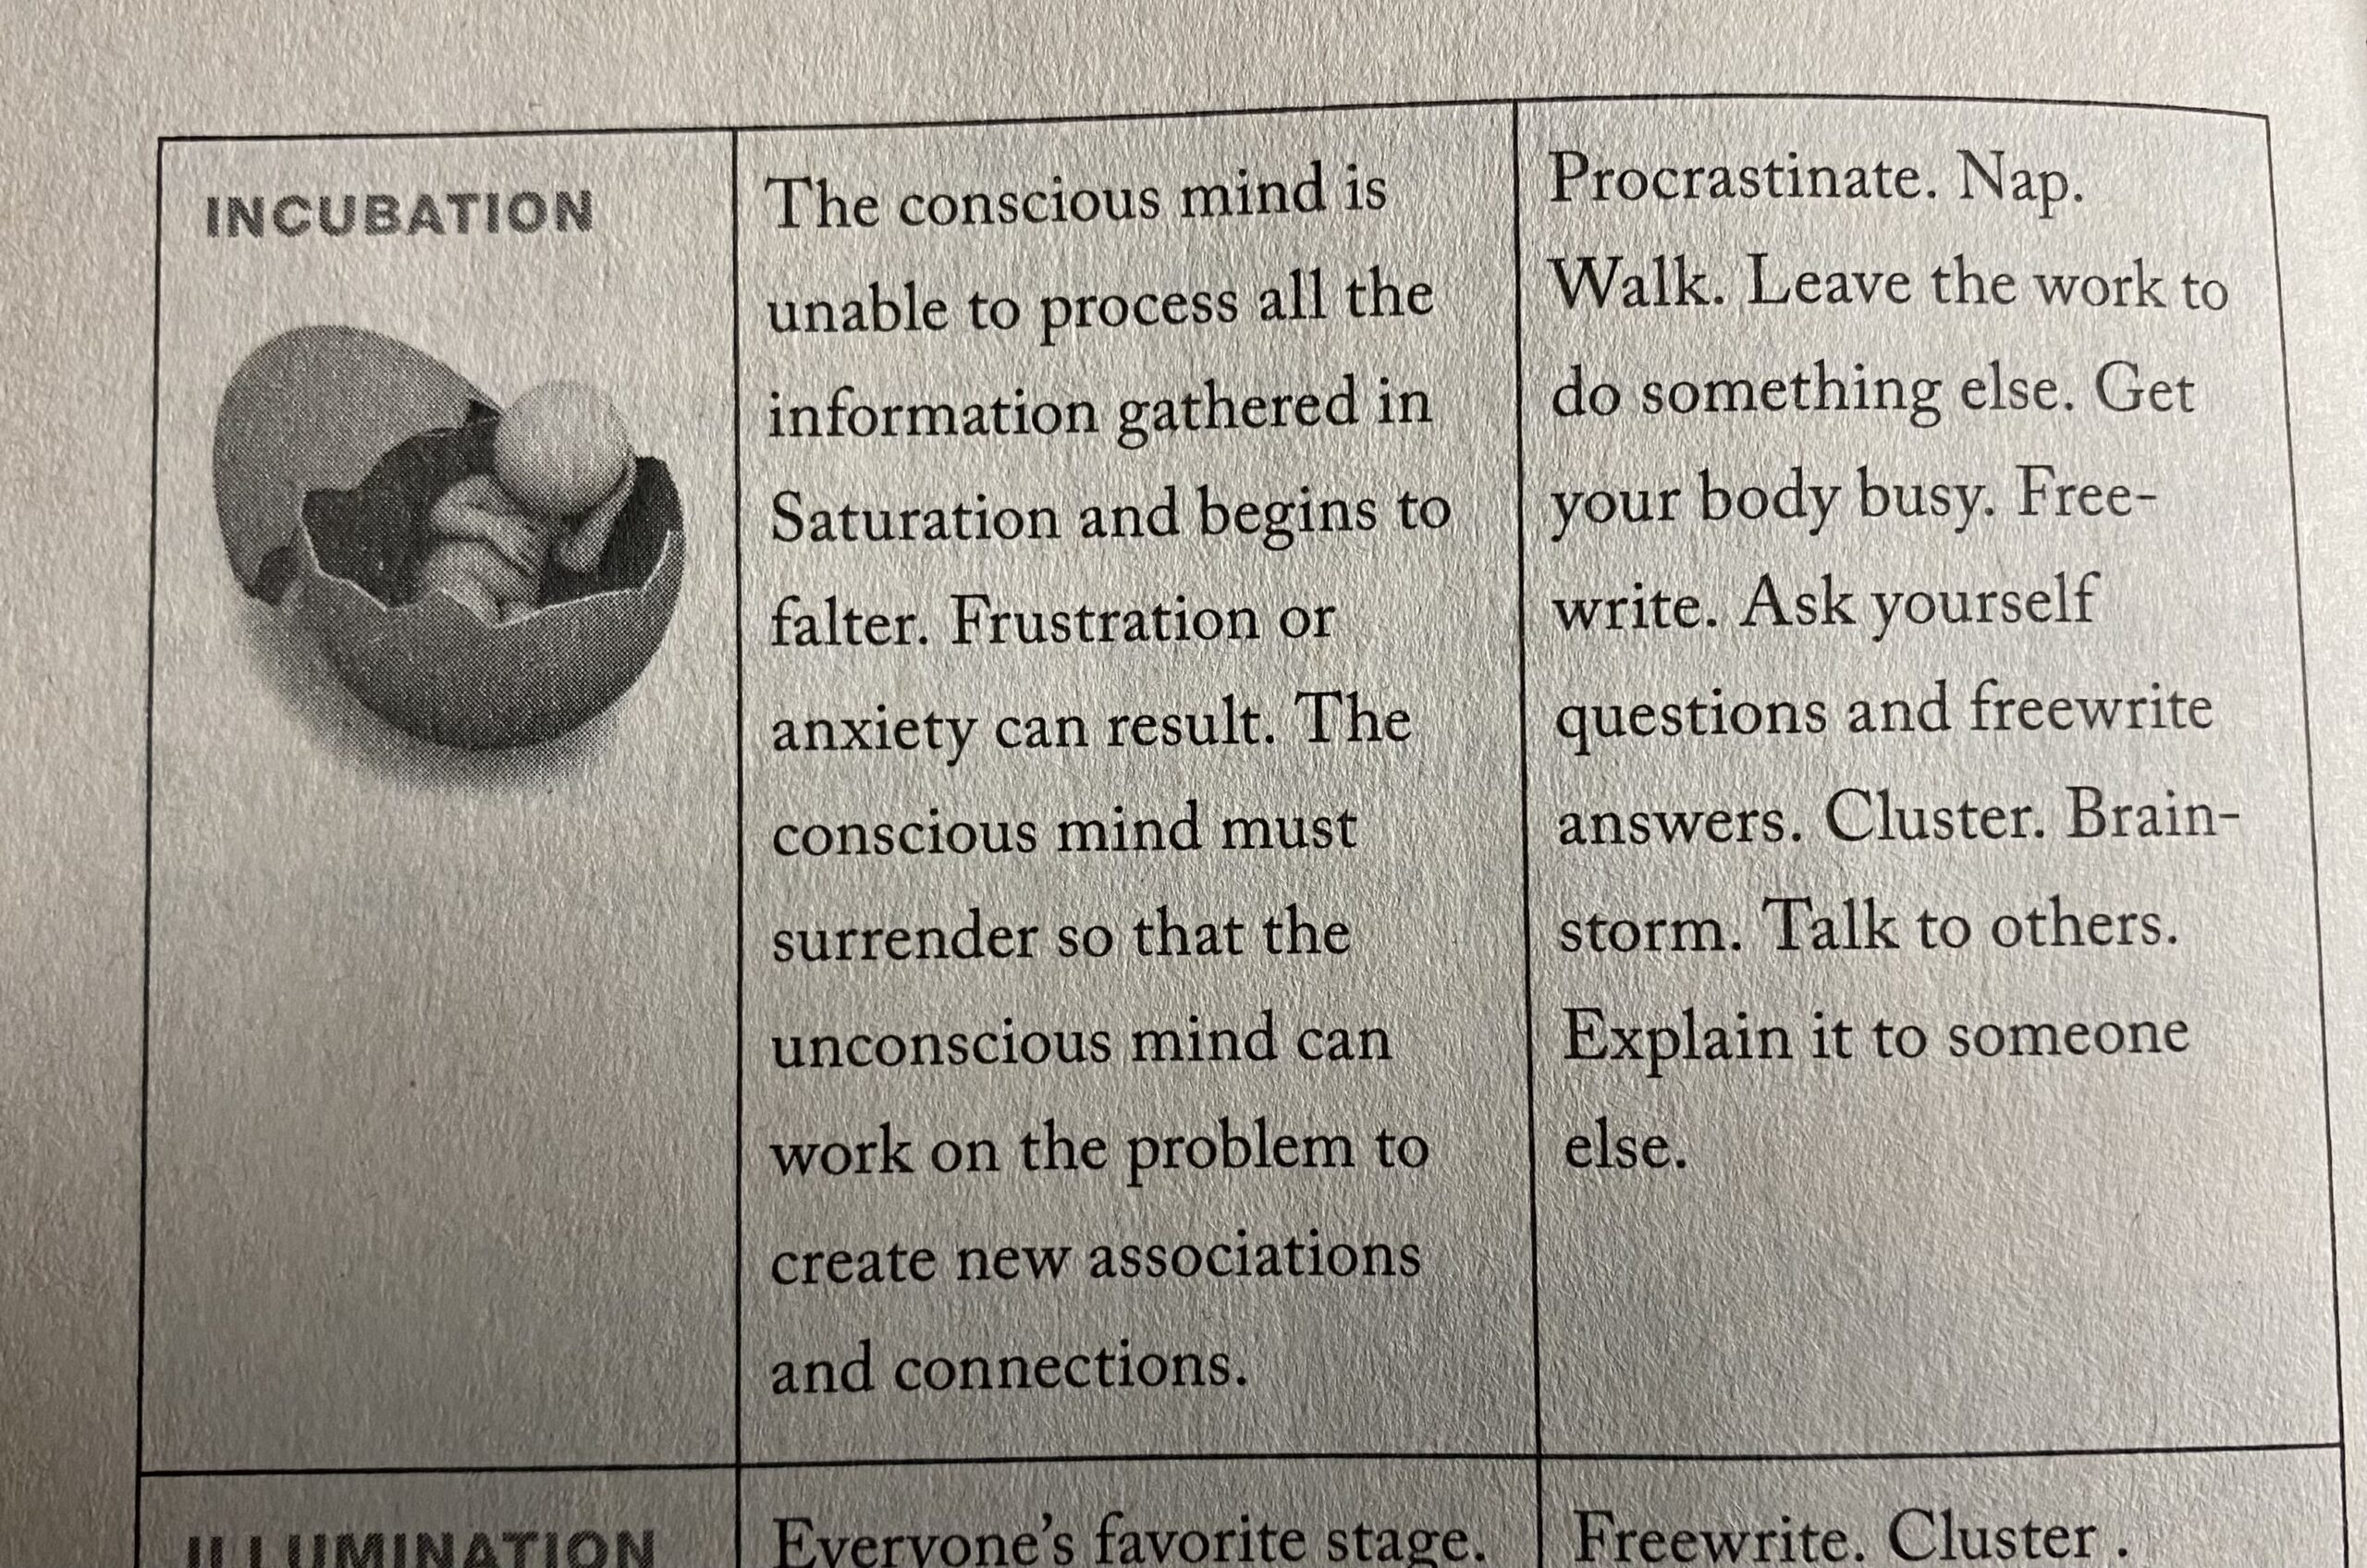 A table entry about "Incubation," in which "the conscious mind must surrender so that the unconscious mind can work on the problem." Strategies include walking and napping.